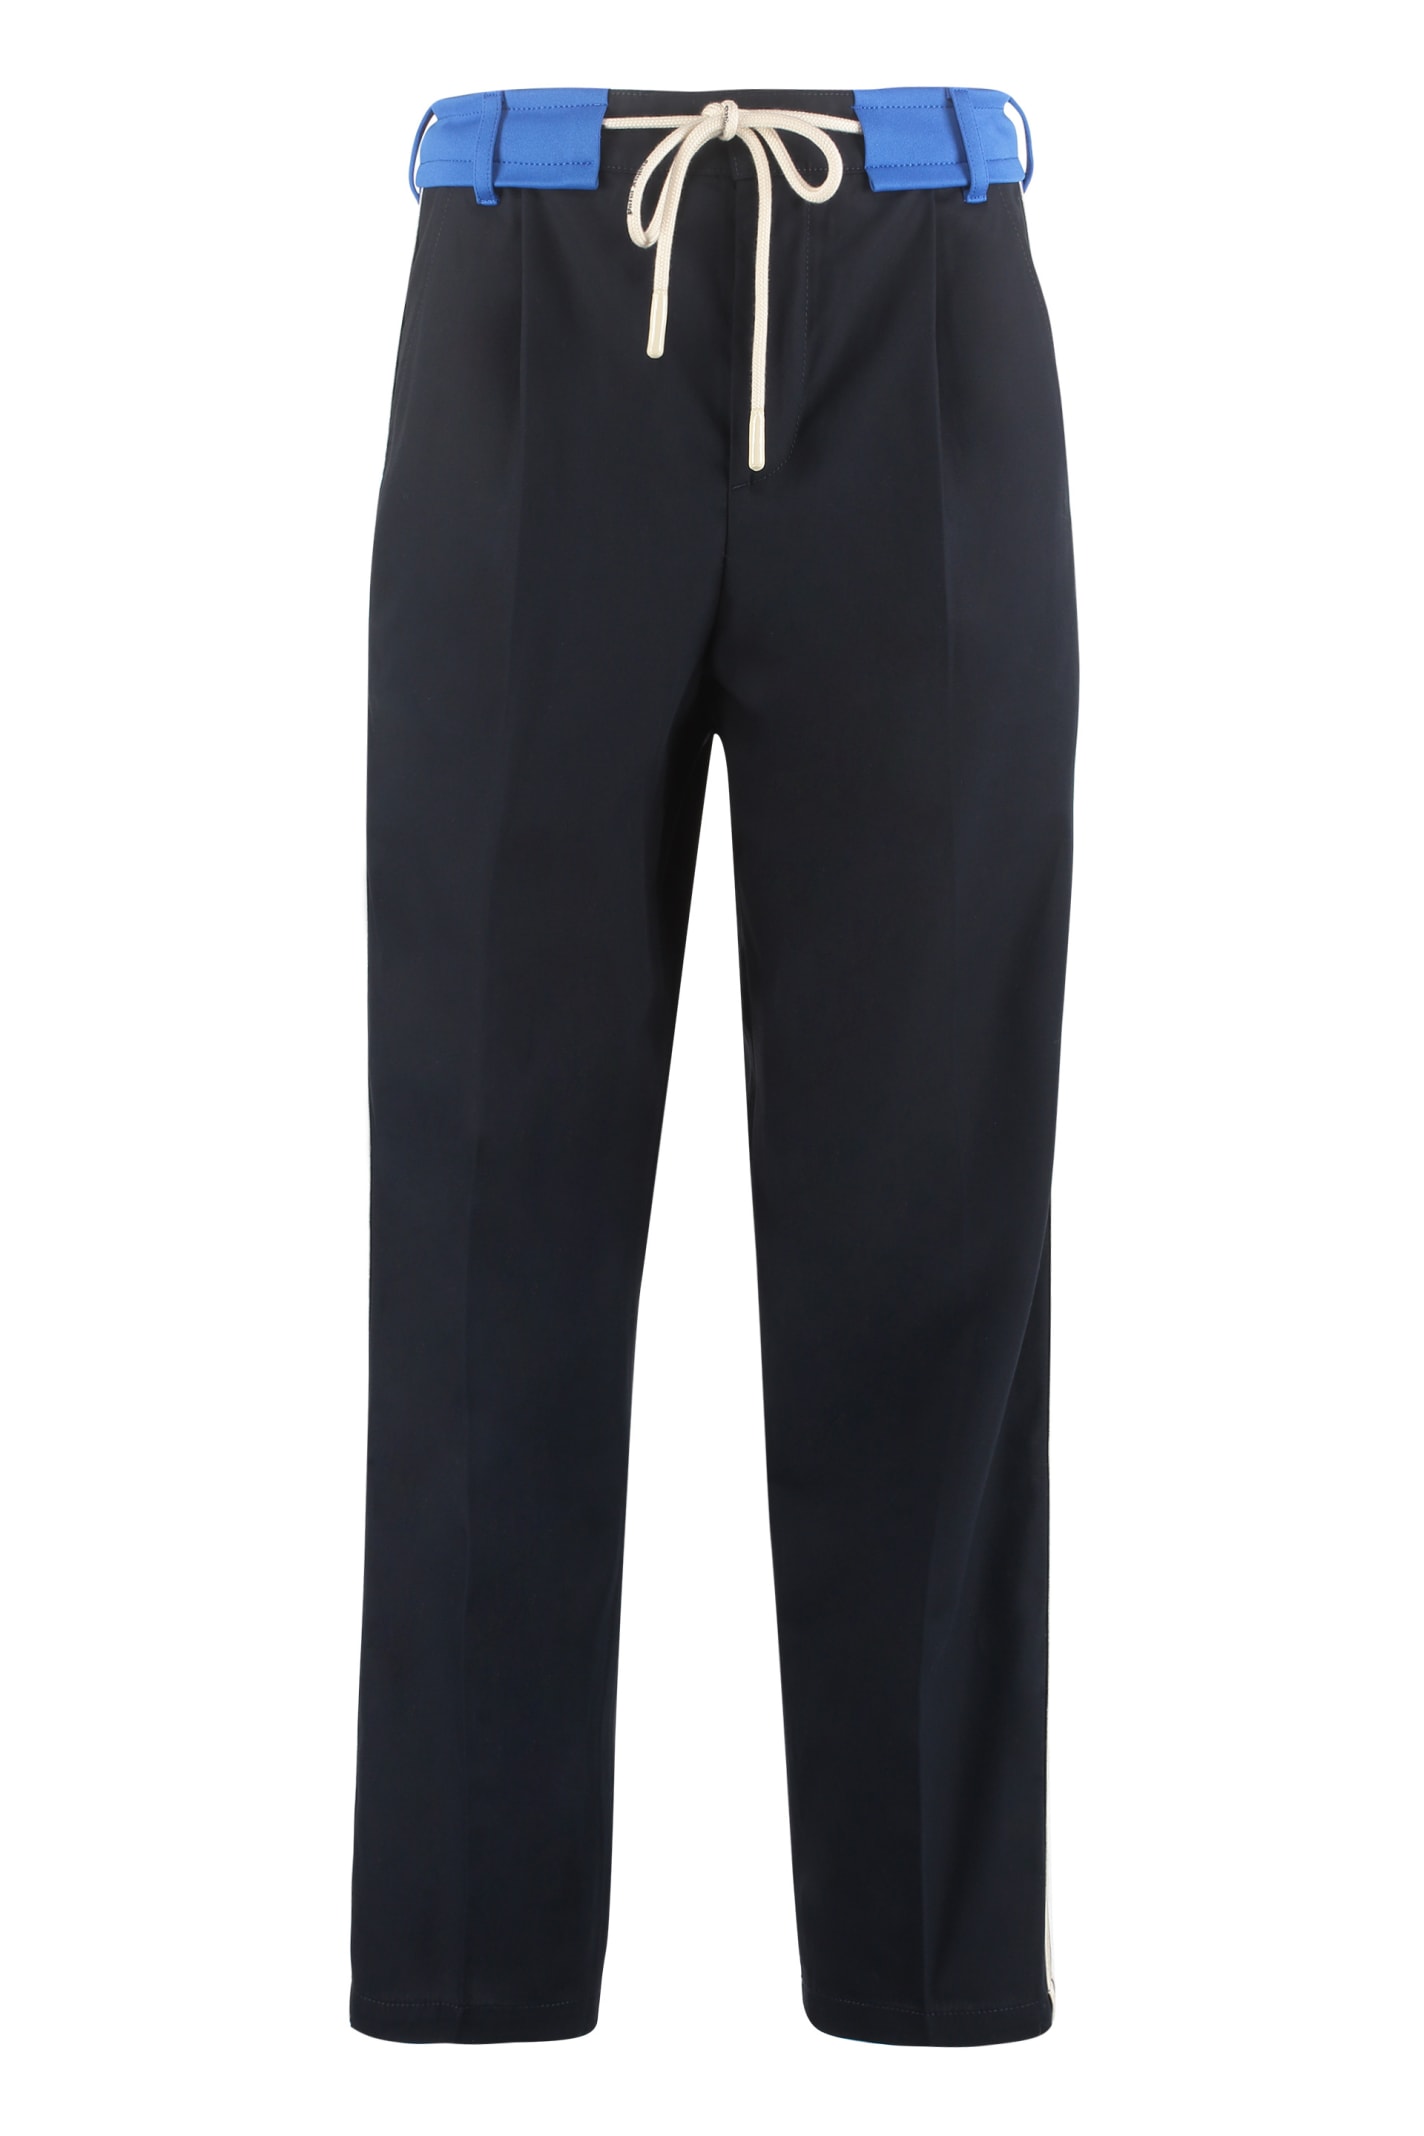 Palm Angels Contrast Side Stripes Trousers